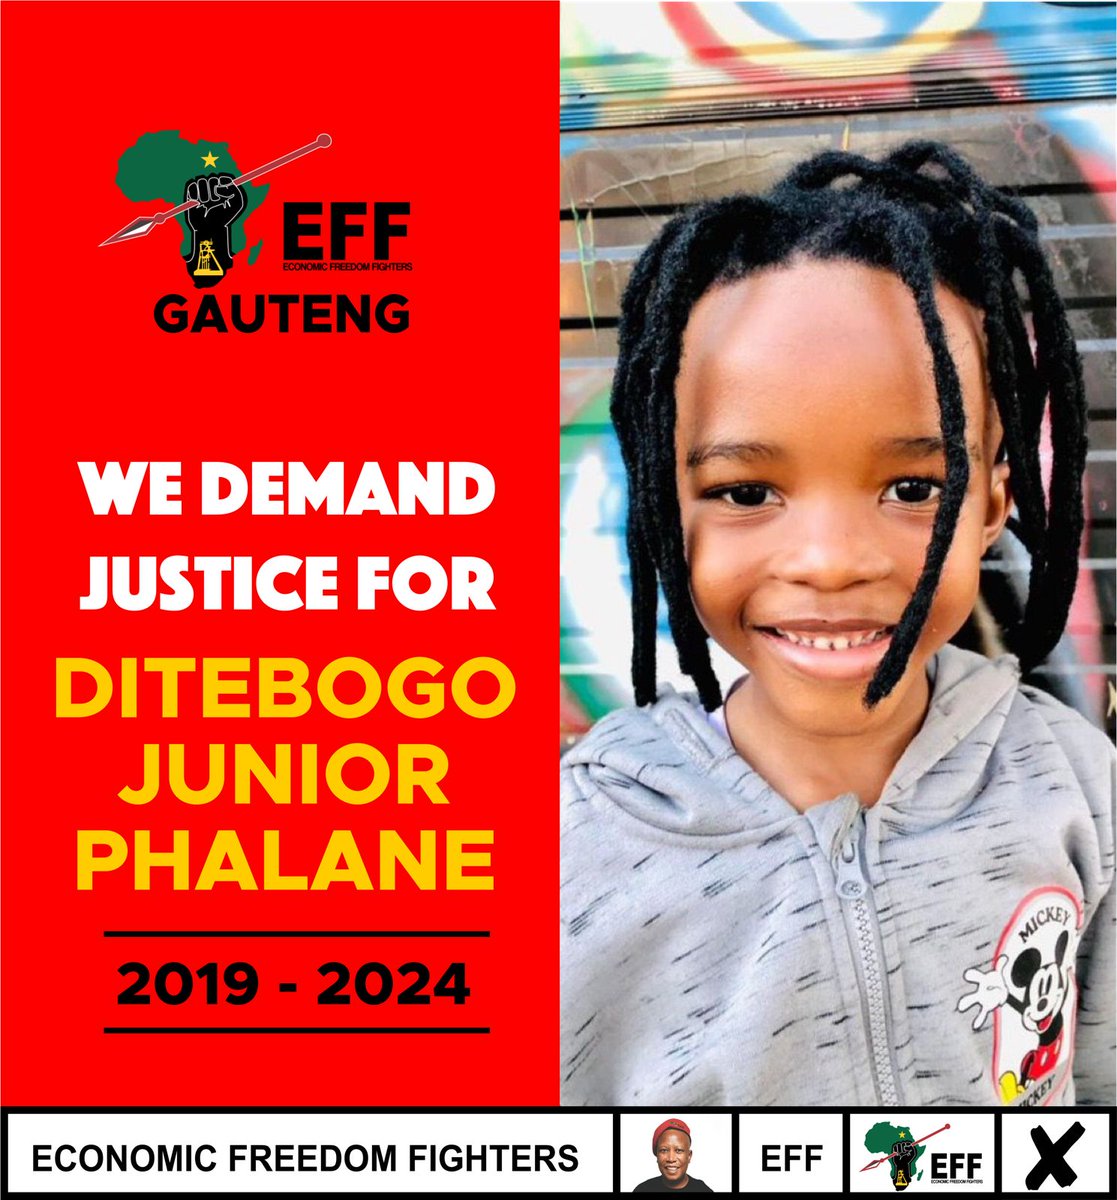 Lawlessness, absence of justice and the prevailing culture of impunity have created a breeding ground for criminals to operate with audicity, leaving law abiding citizens vulnerable and exposed to the brutality of criminals. We demand justice for Ditebogo Junior Phalane.